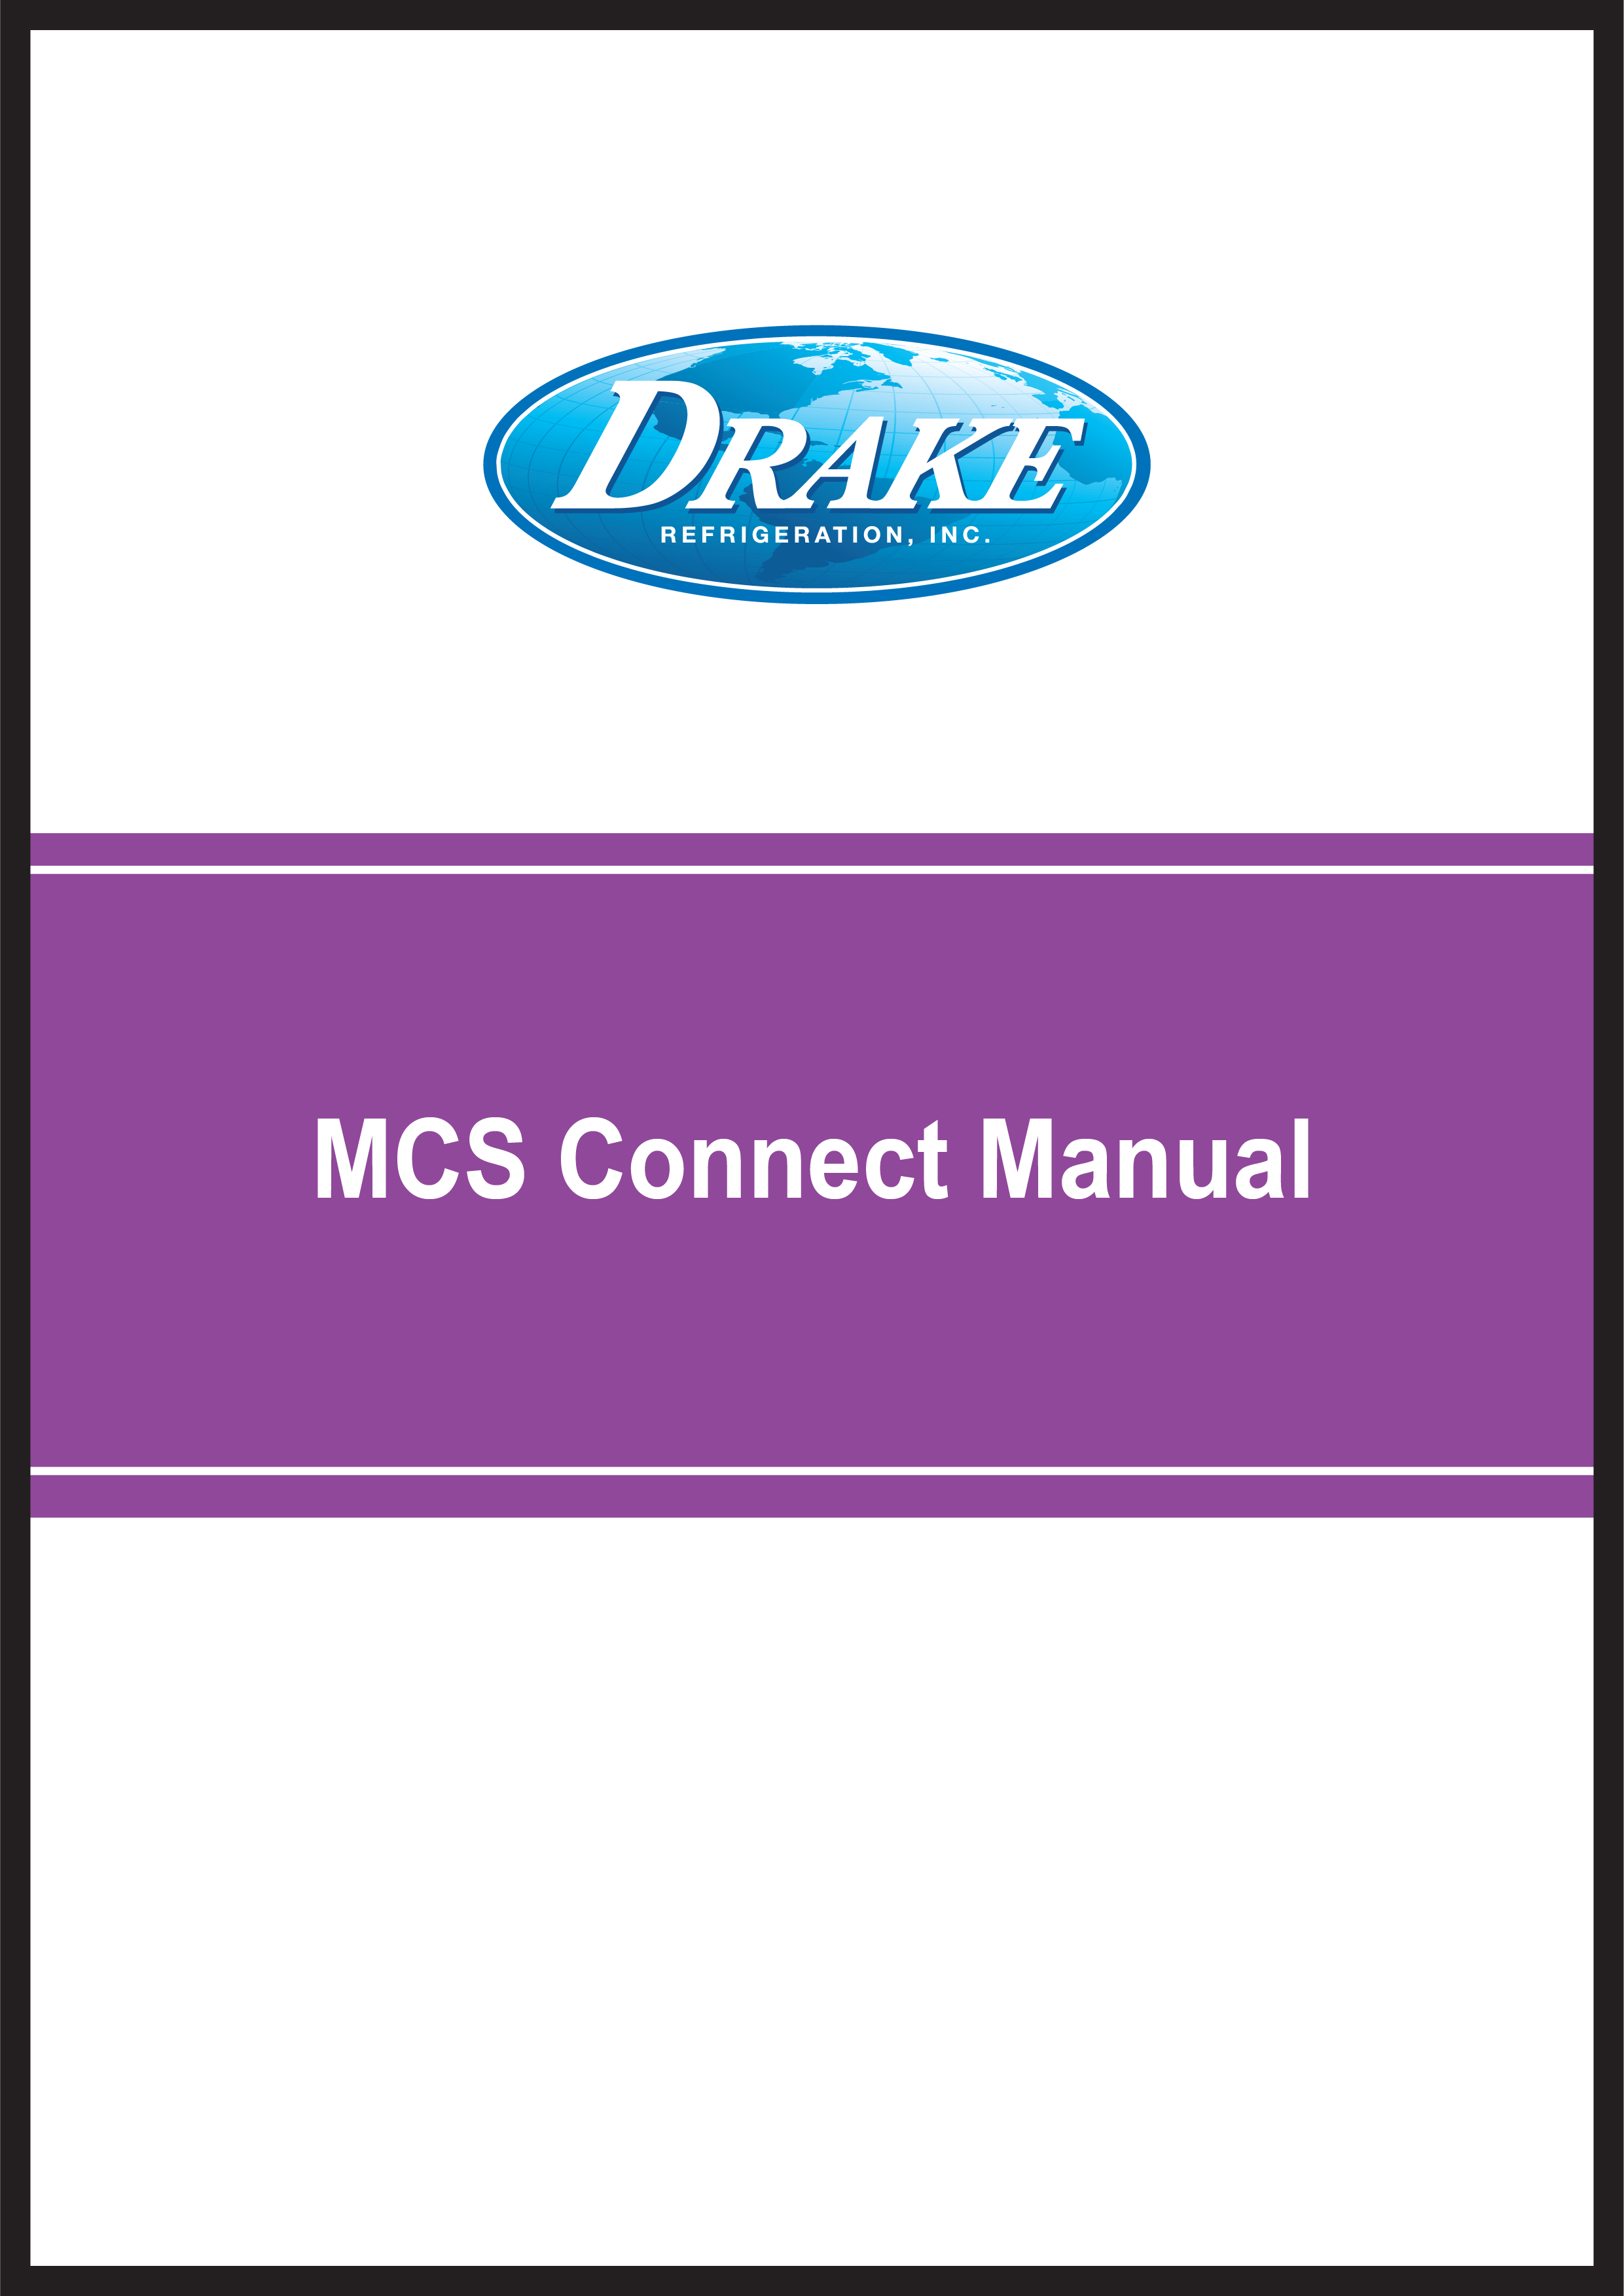 Web Template  MCS Connect Manual.png